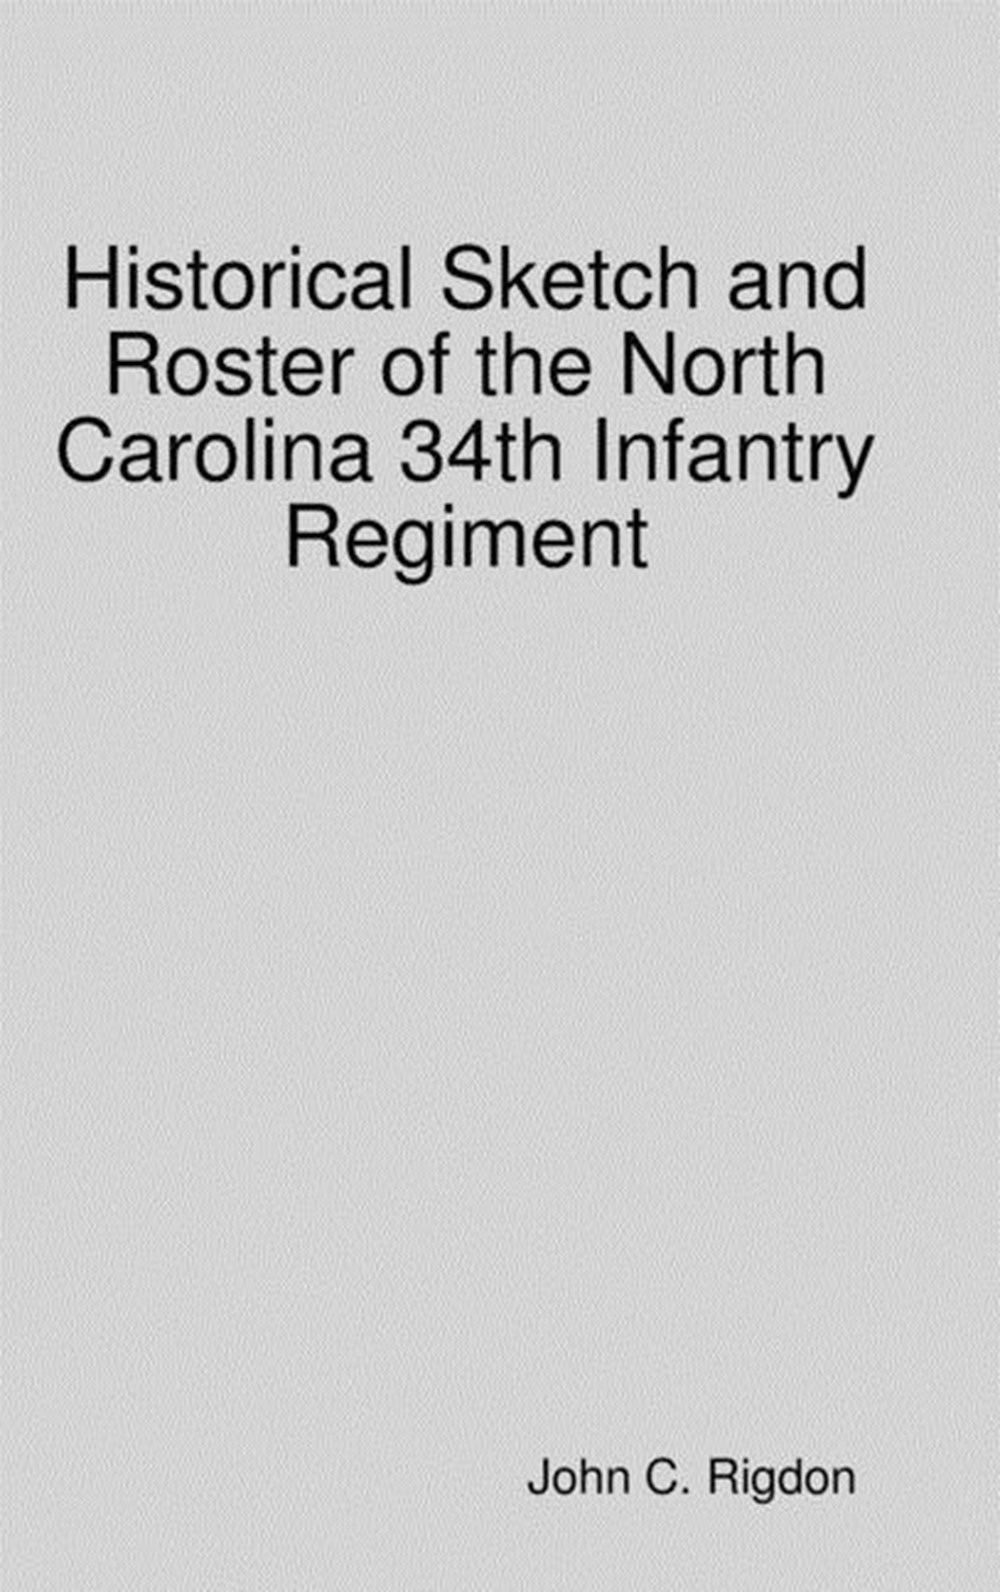 Historical Sketch and Roster of the North Carolina 34th Infantry Regiment